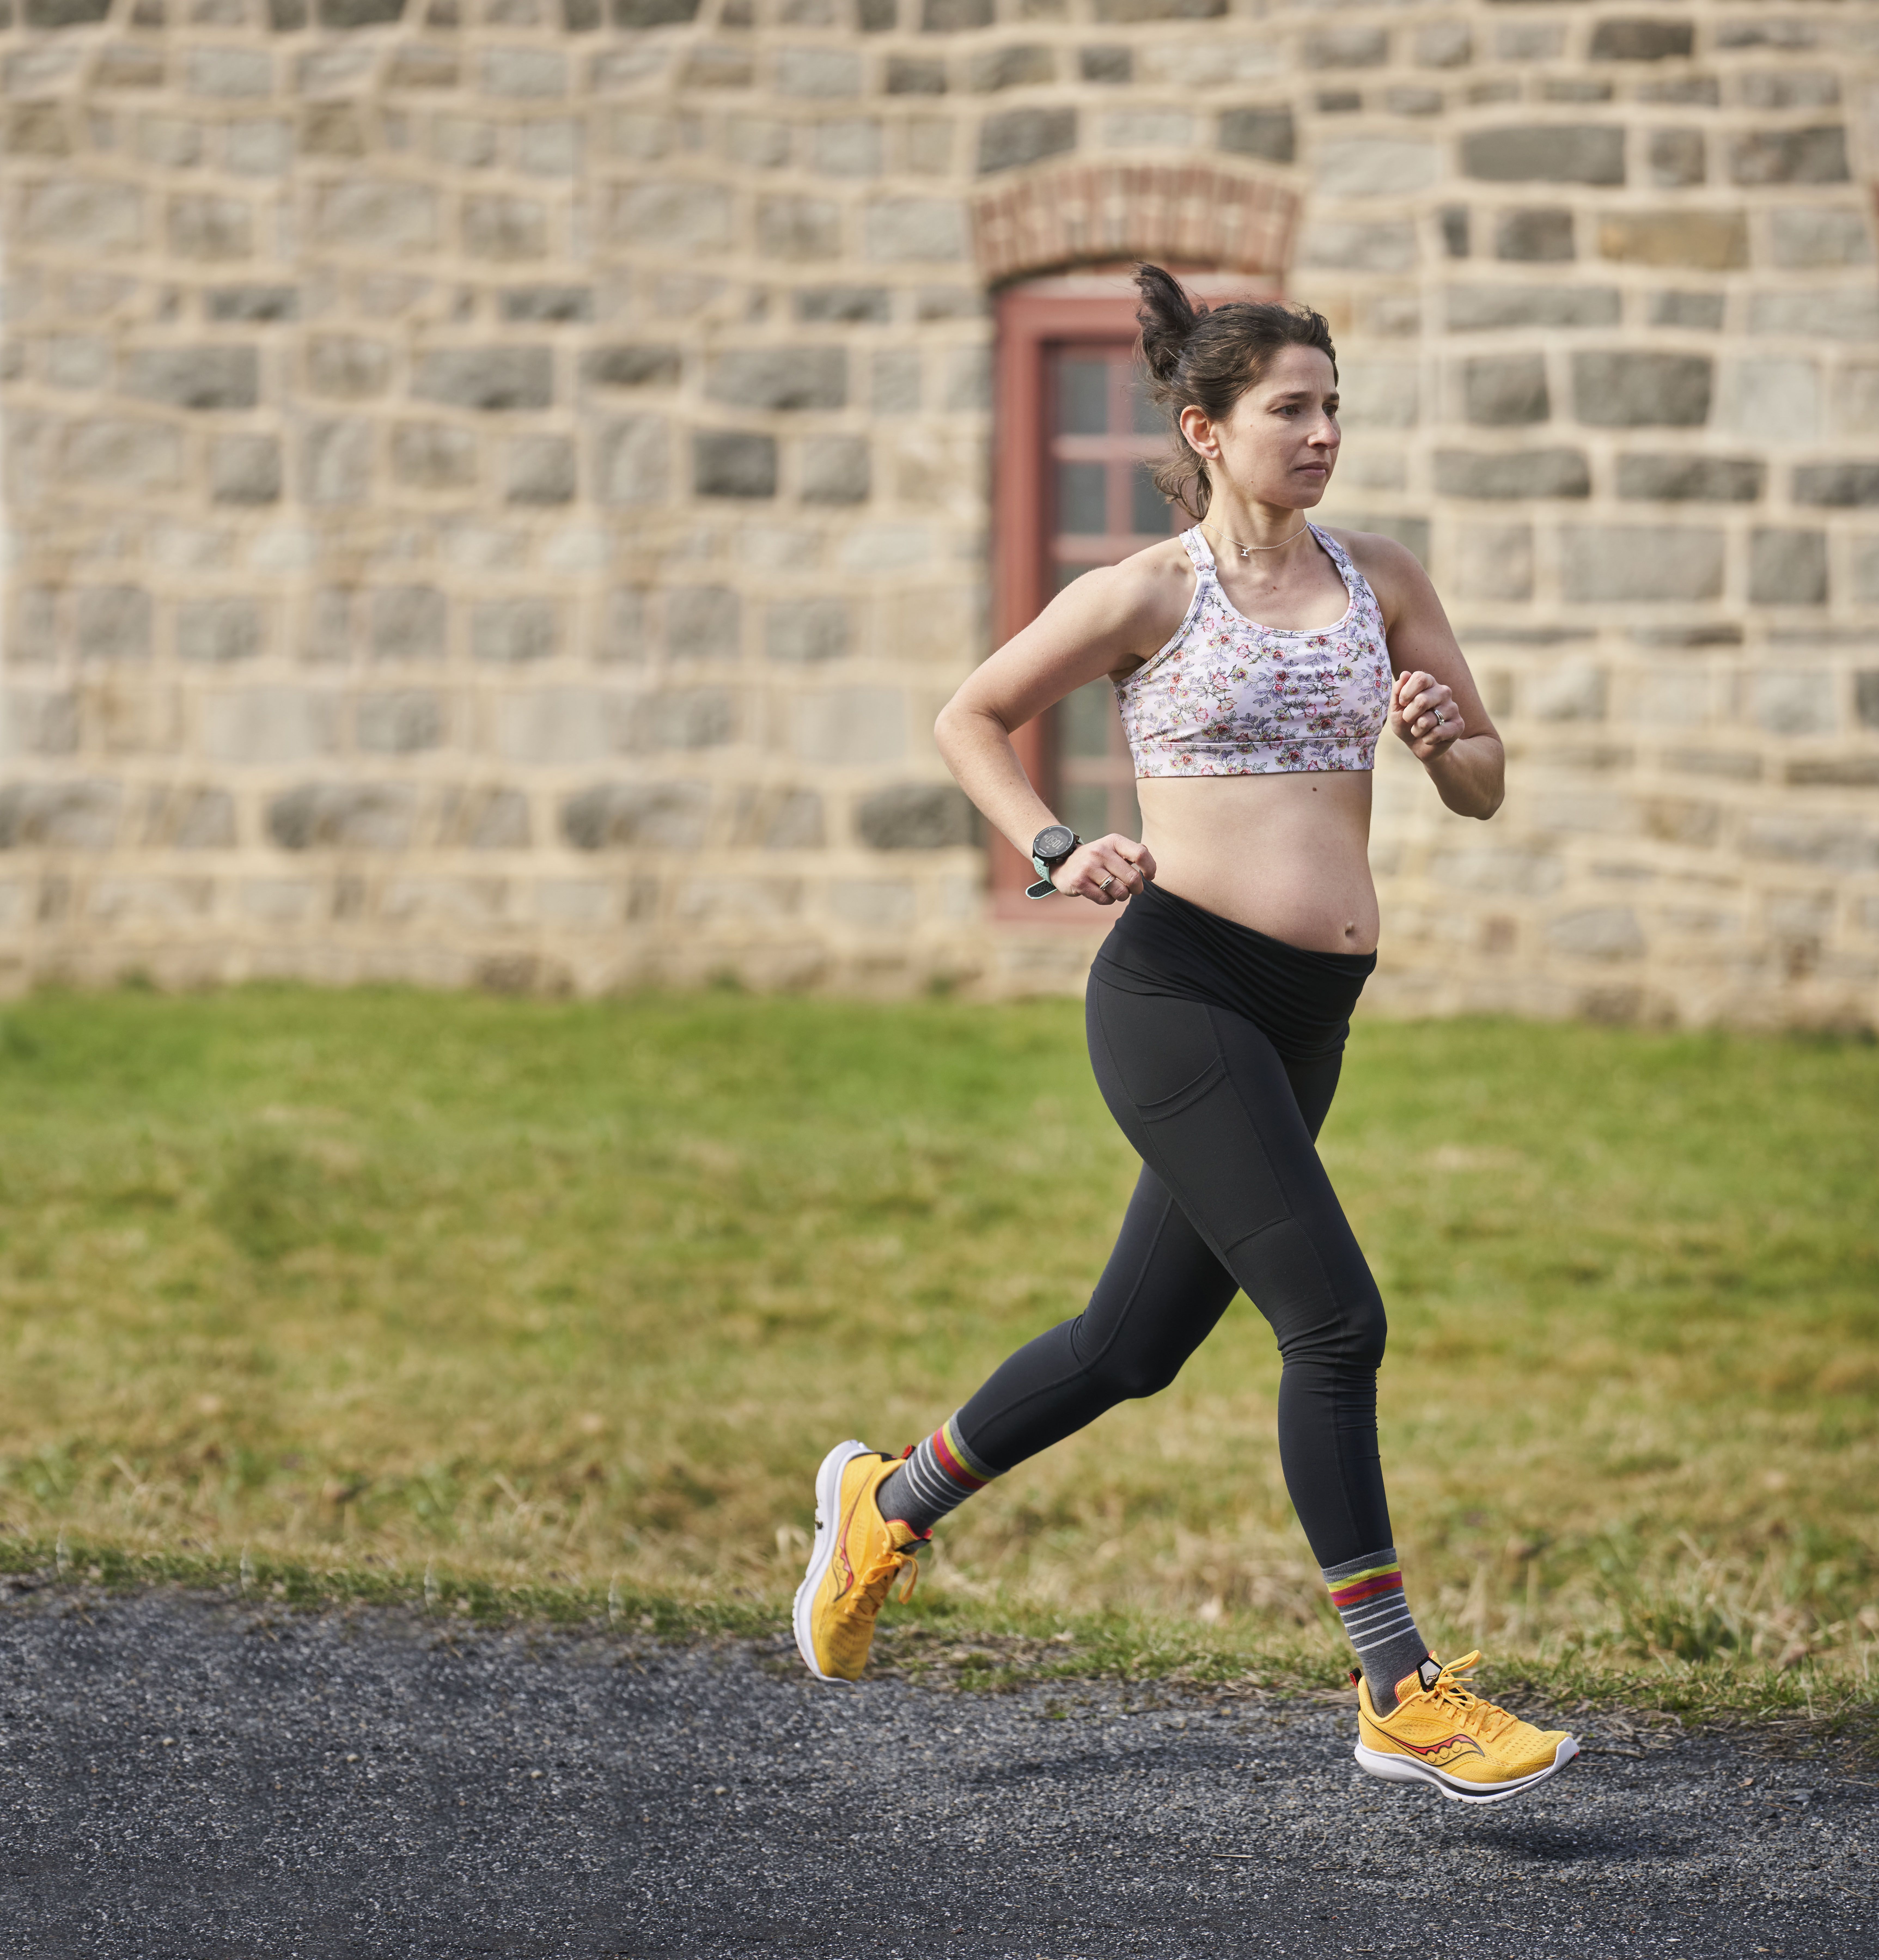 Pregnancy exercise guidelines: How should pregnant athletes train?